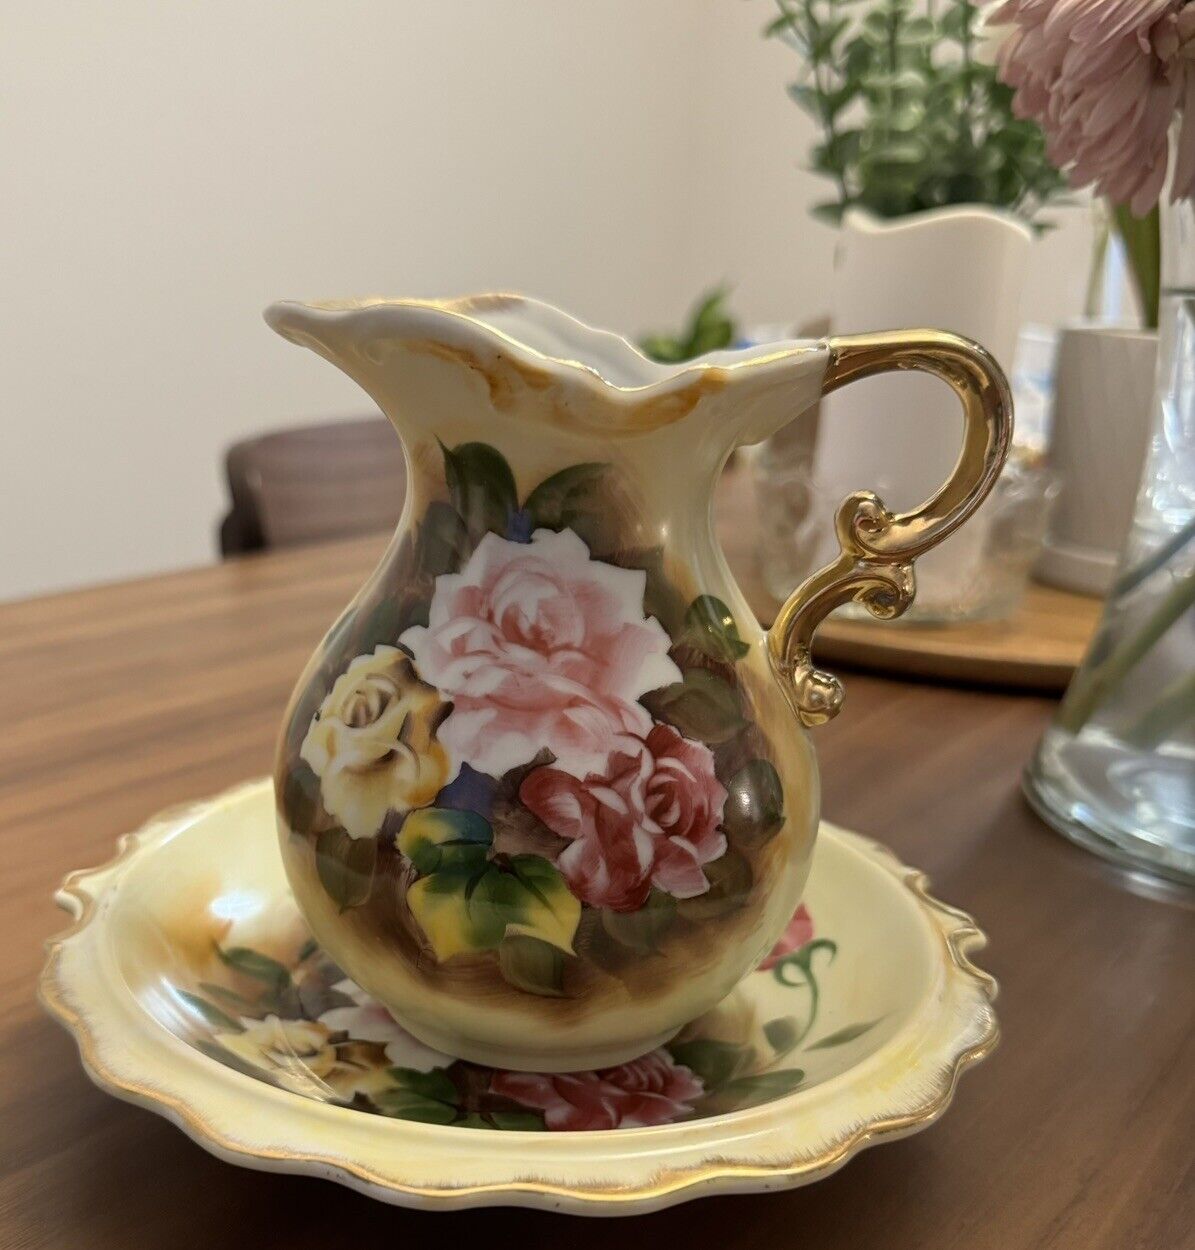 Vintage Enesco Hand-Painted Rose Floral Small Pitcher & Bowl with Gold Trim